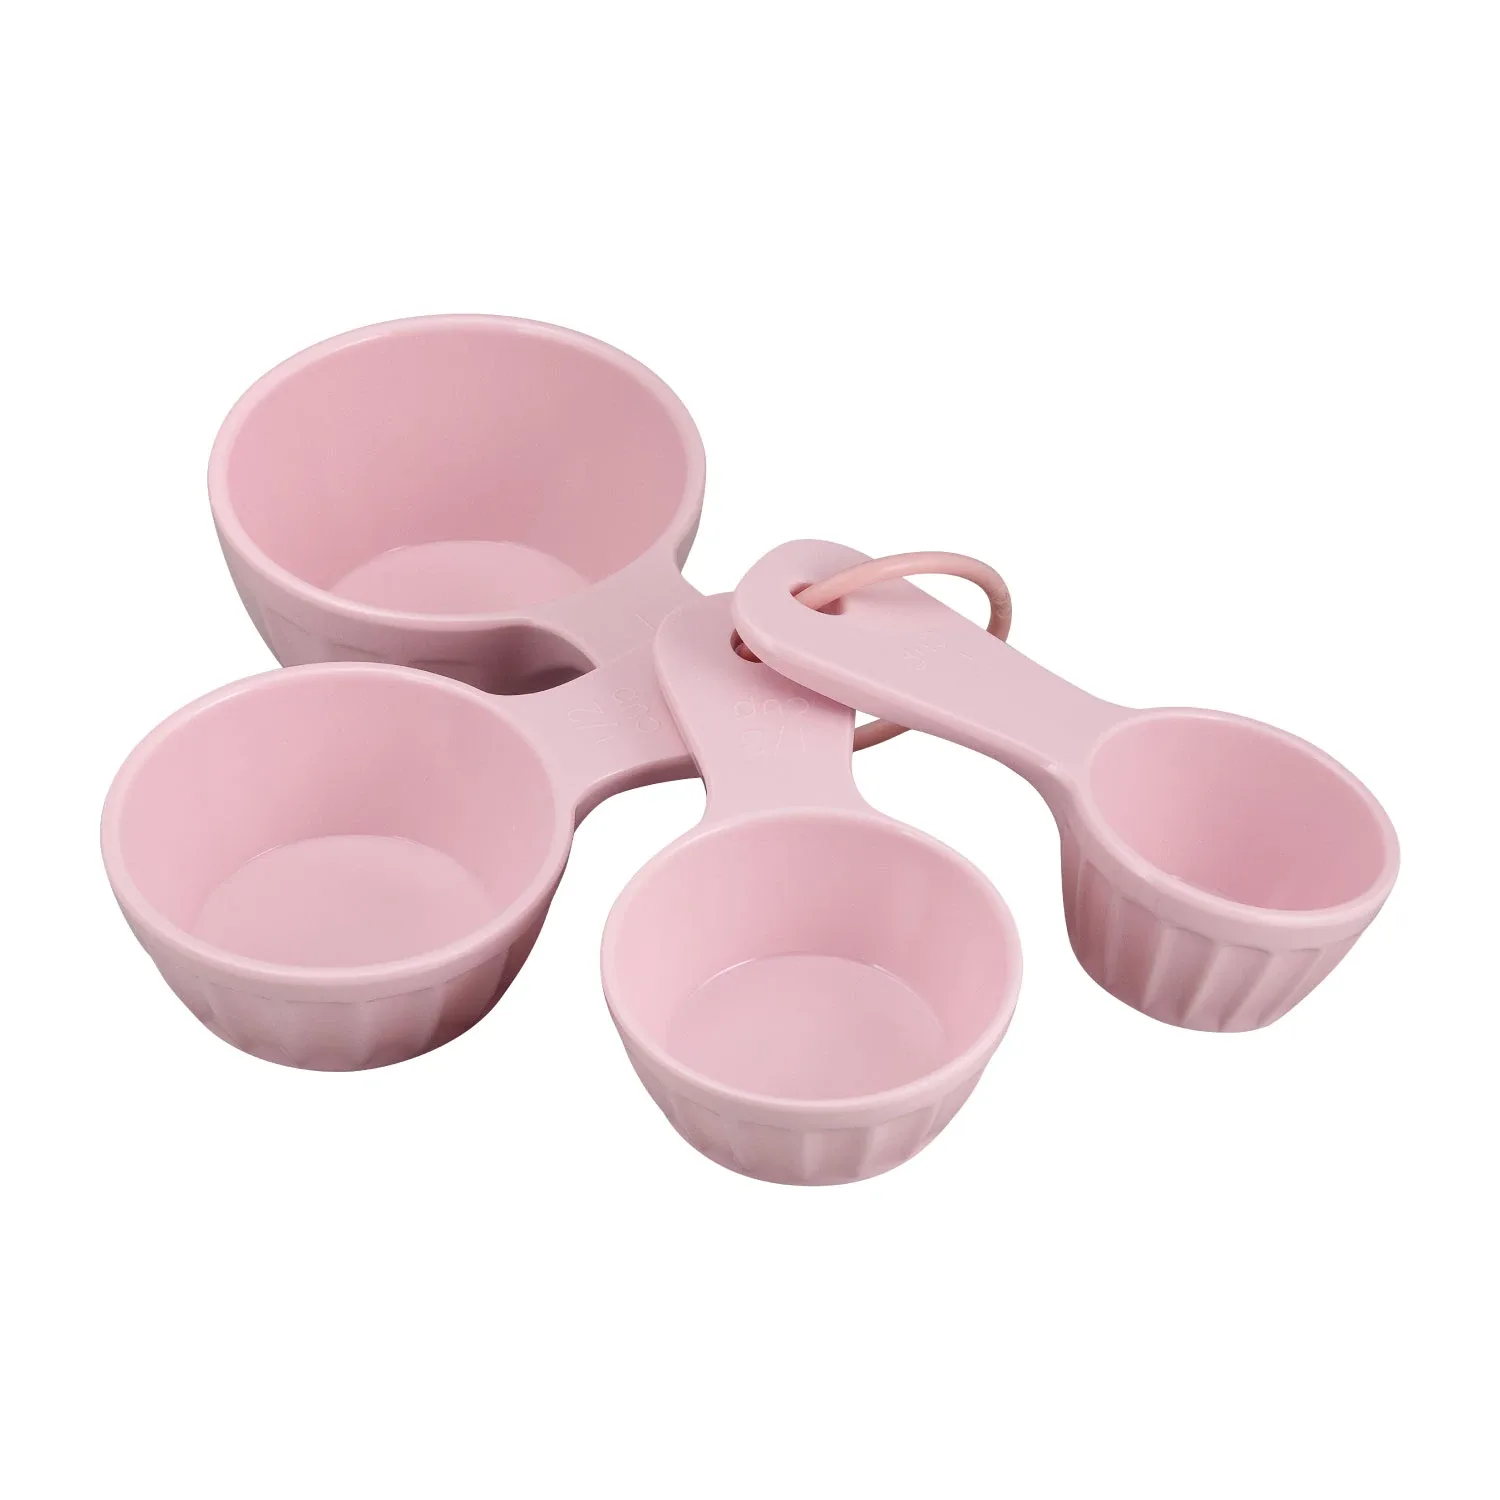 Jennifer Garner's Pink Measuring Cups Are Too Cute — Here's Where